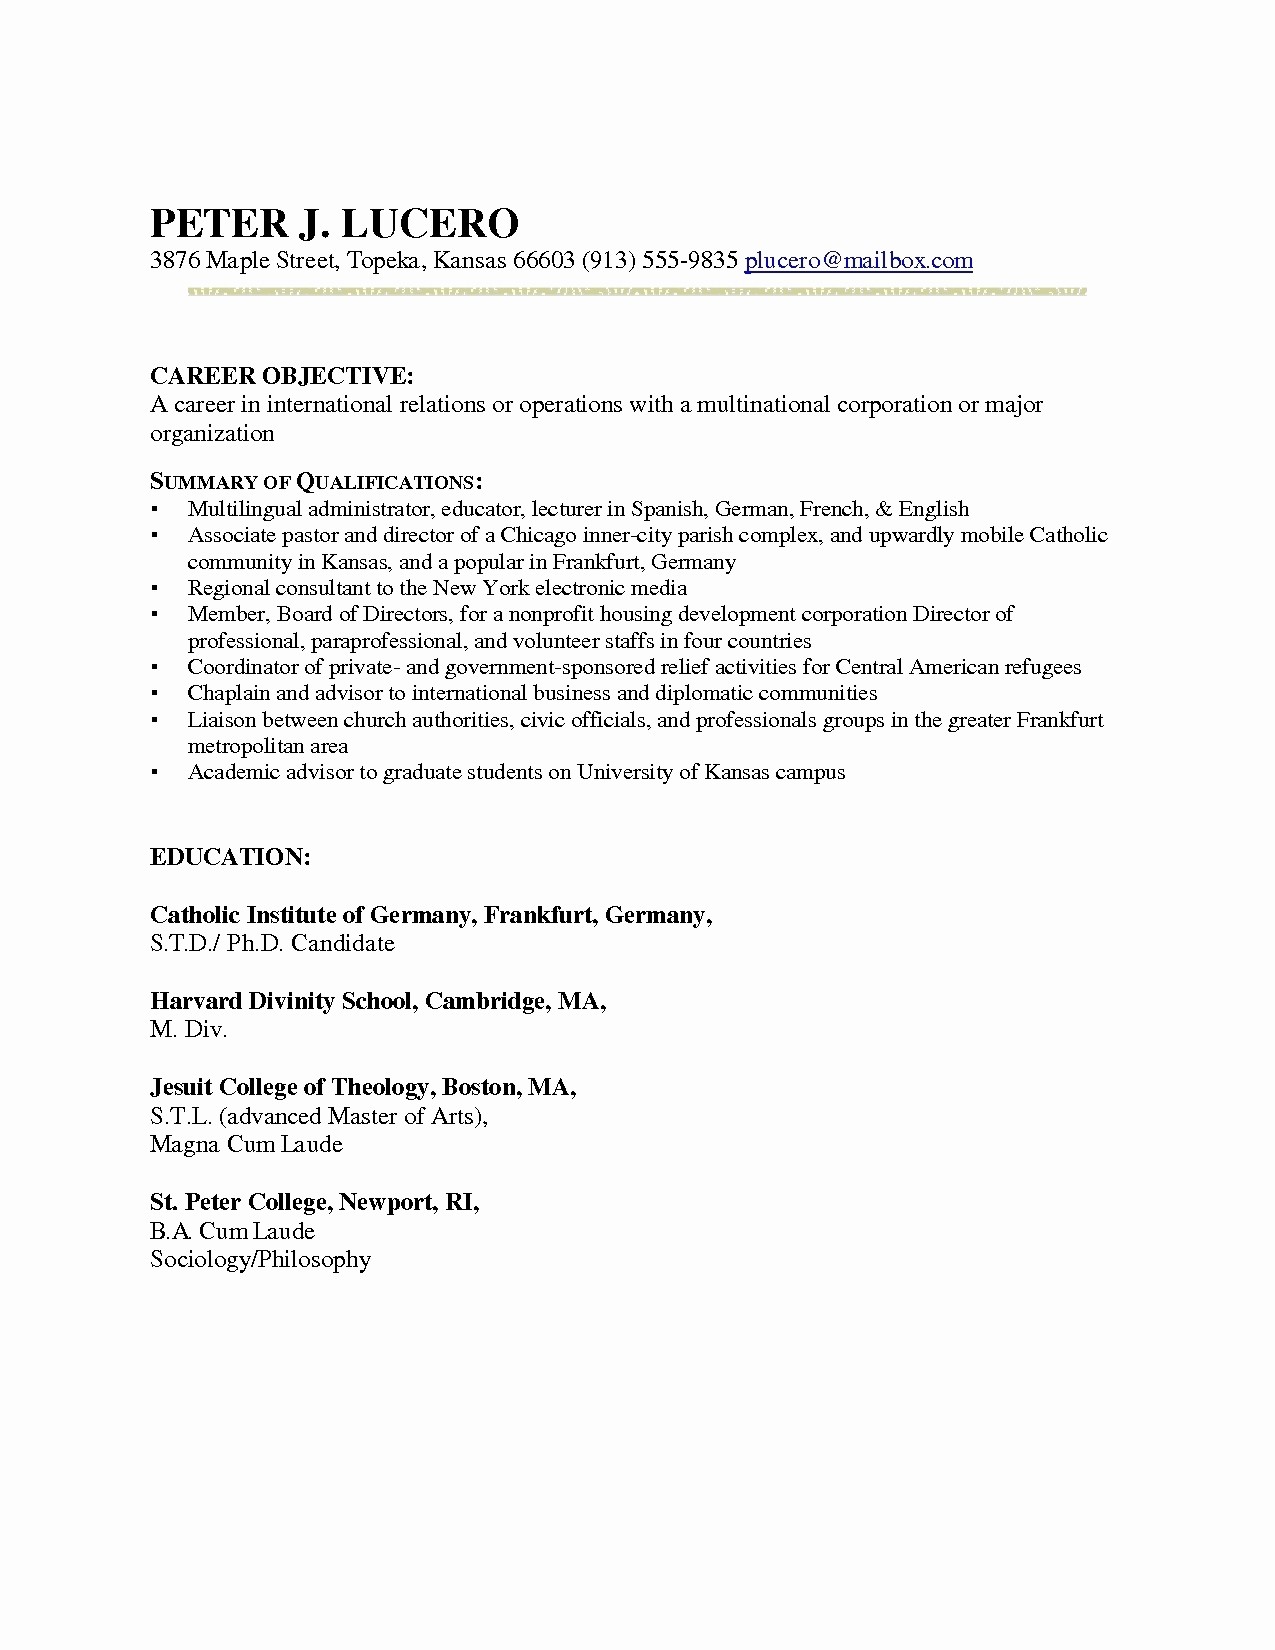 Combined Resume and Cover Letter New Bination Resume Sample Career Change